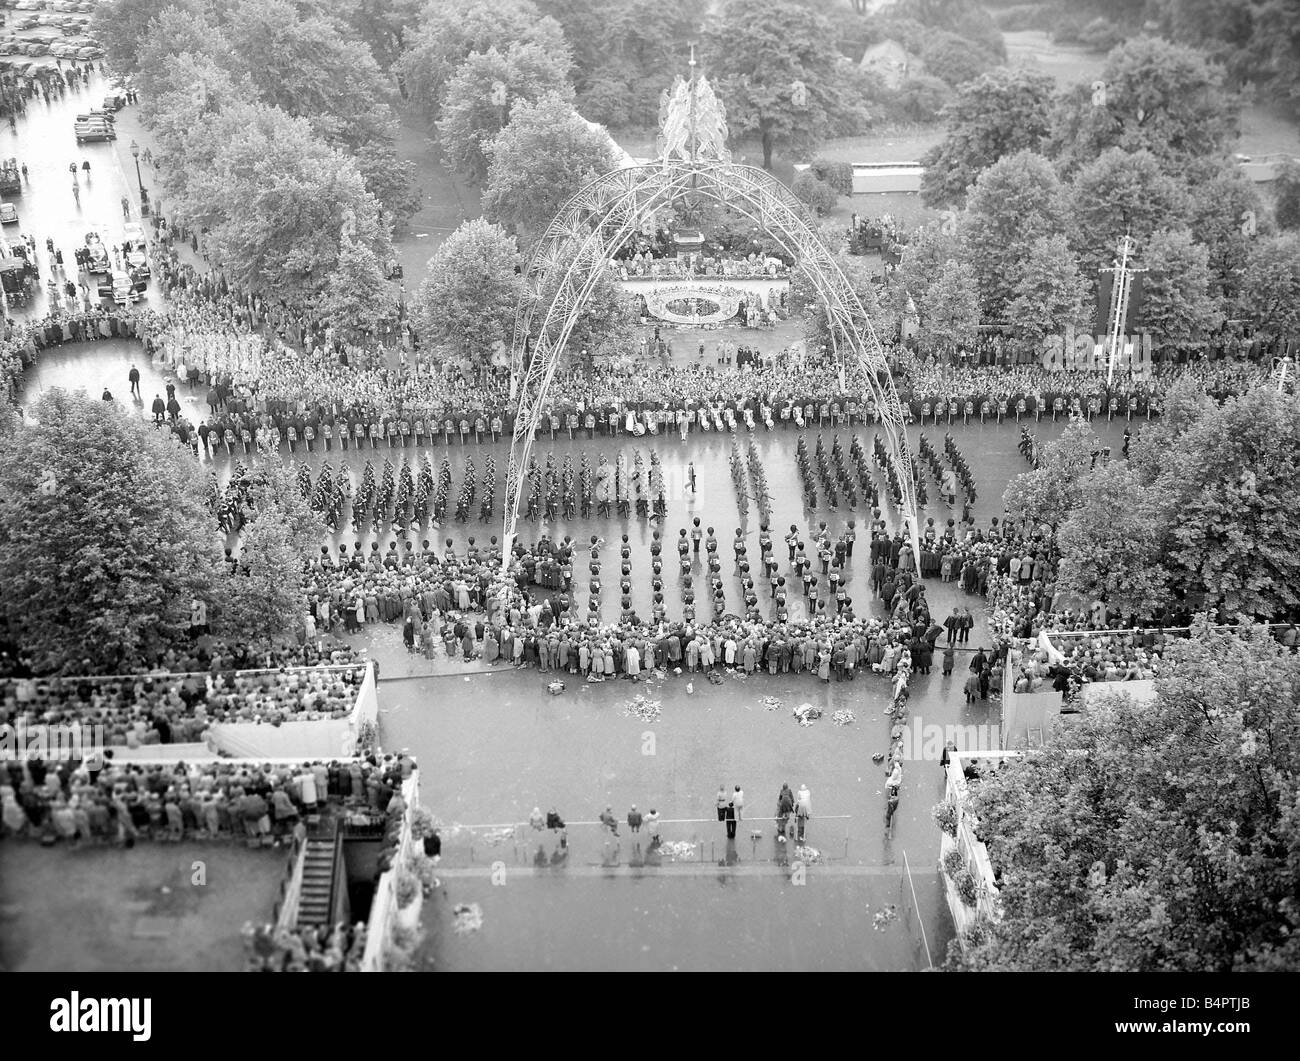 Queen Elizabeth ll Coronation June 1953 Views of Procession passing along Pall Mall from Westminster Abbey View taken from top of Duke of York Statue Stock Photo